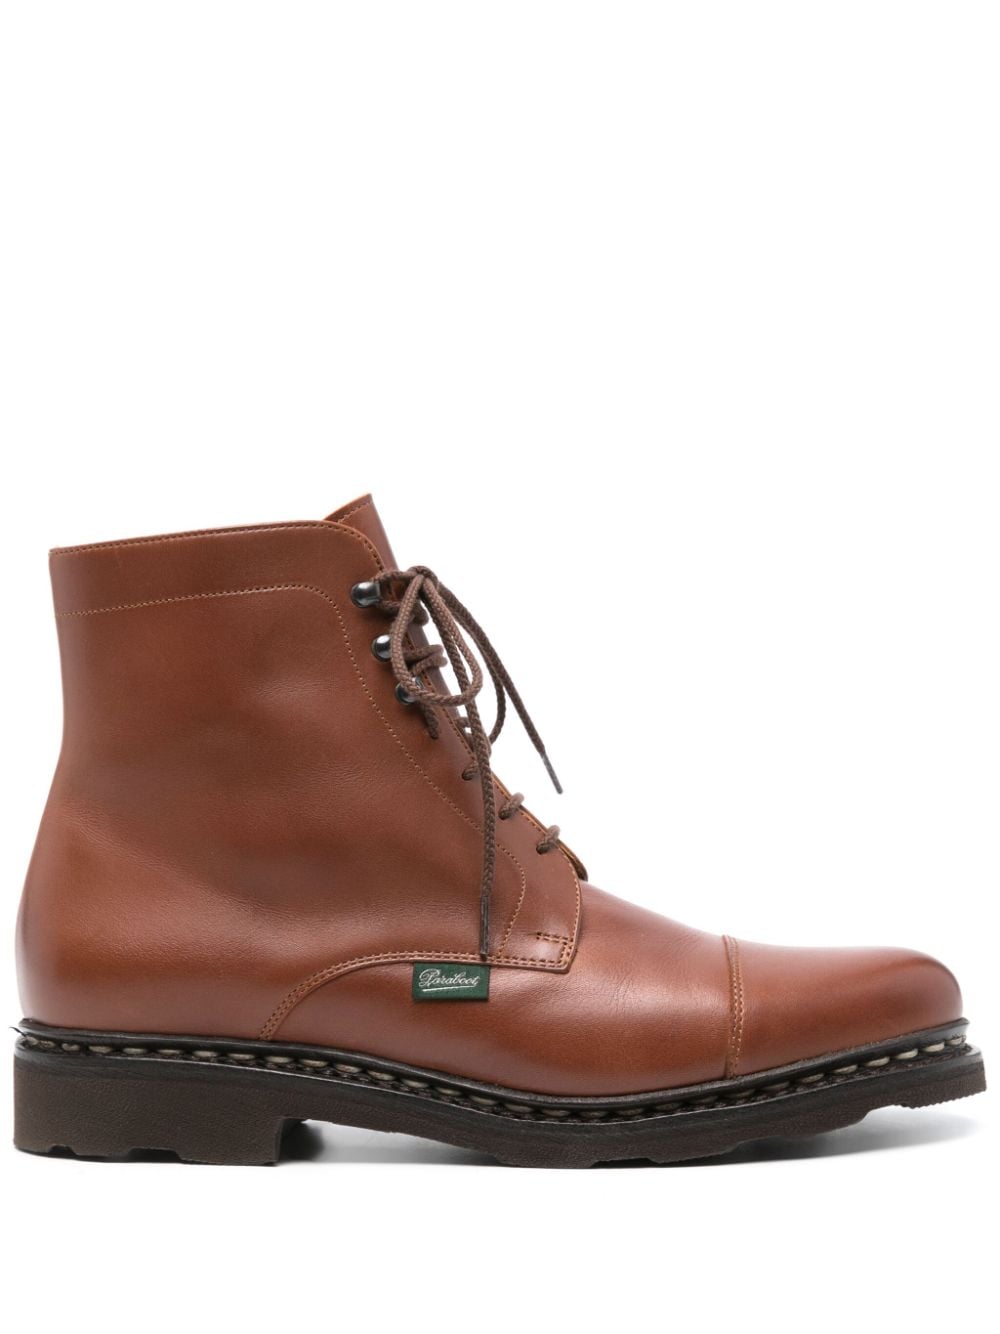 Clamart leather ankle boots